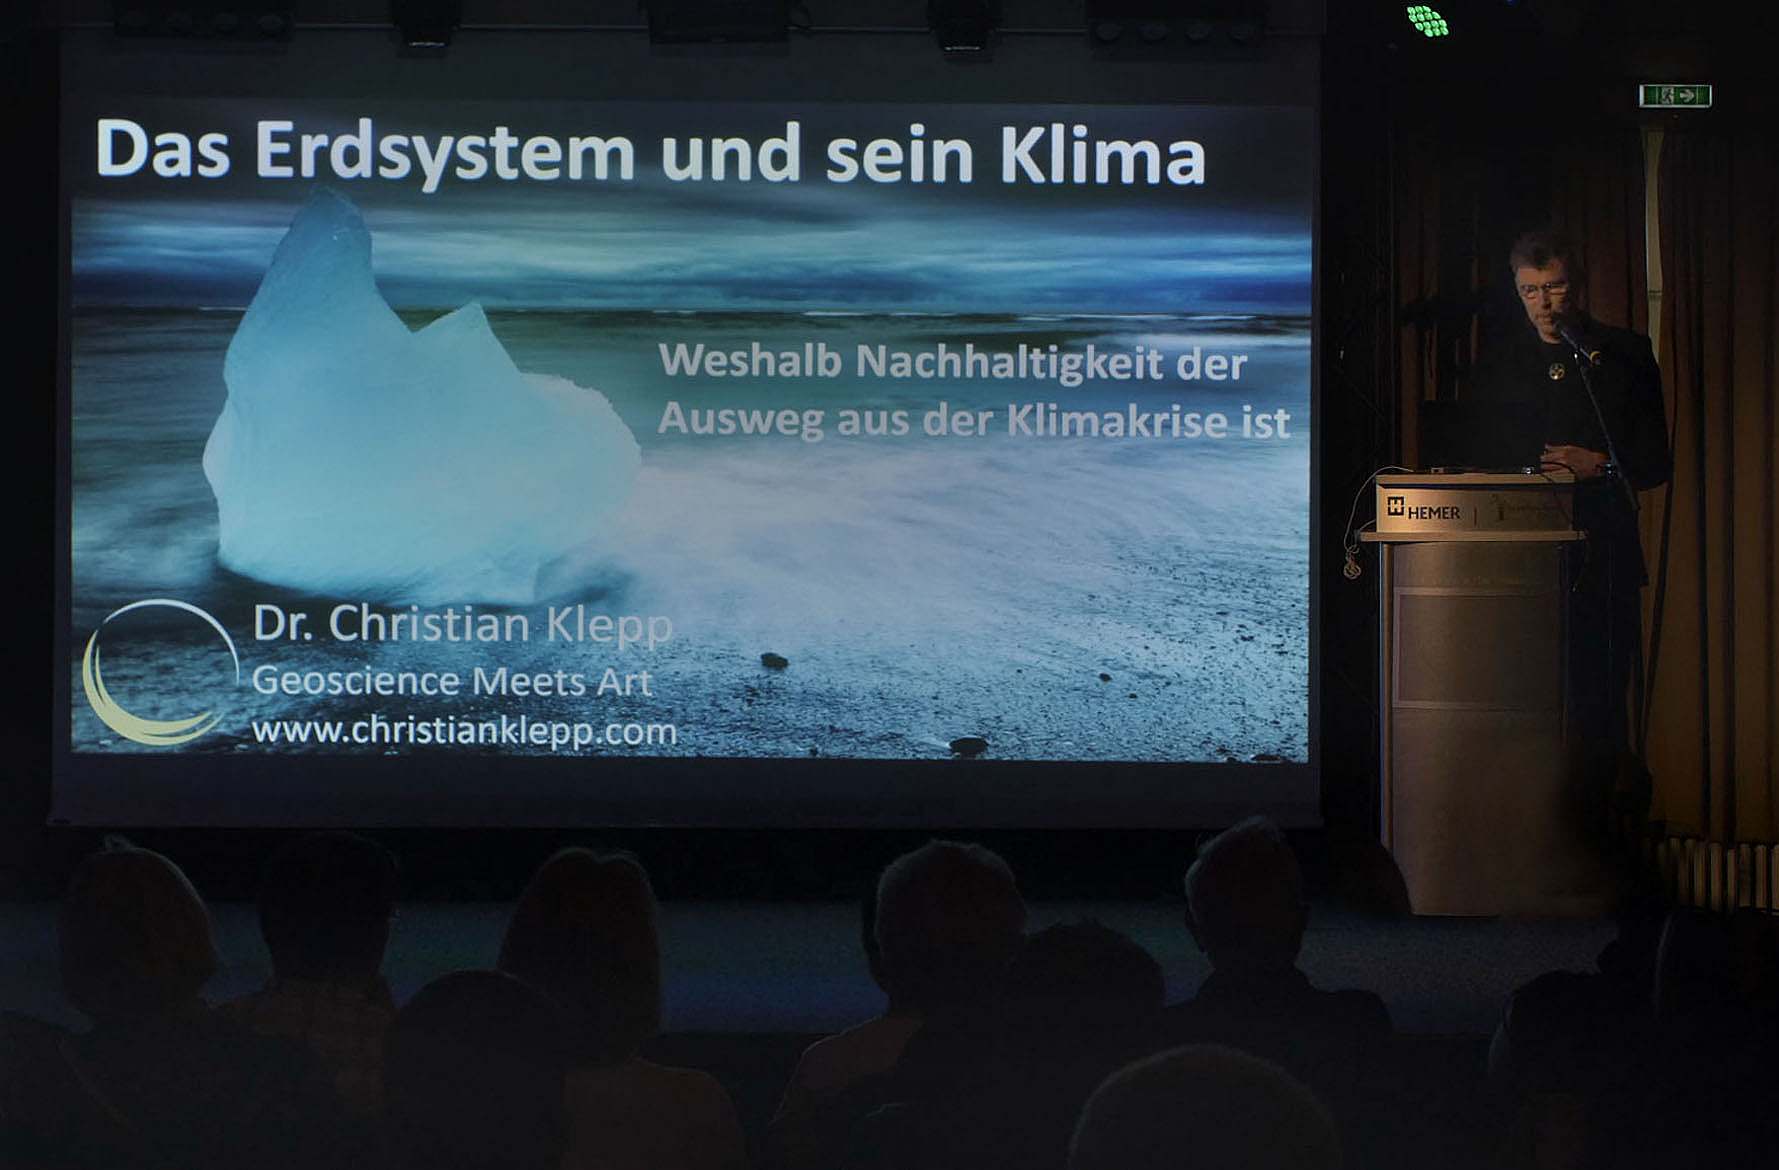 Dr. Christian Klepp giving a lecture on the Earth system, climate change and sustainability